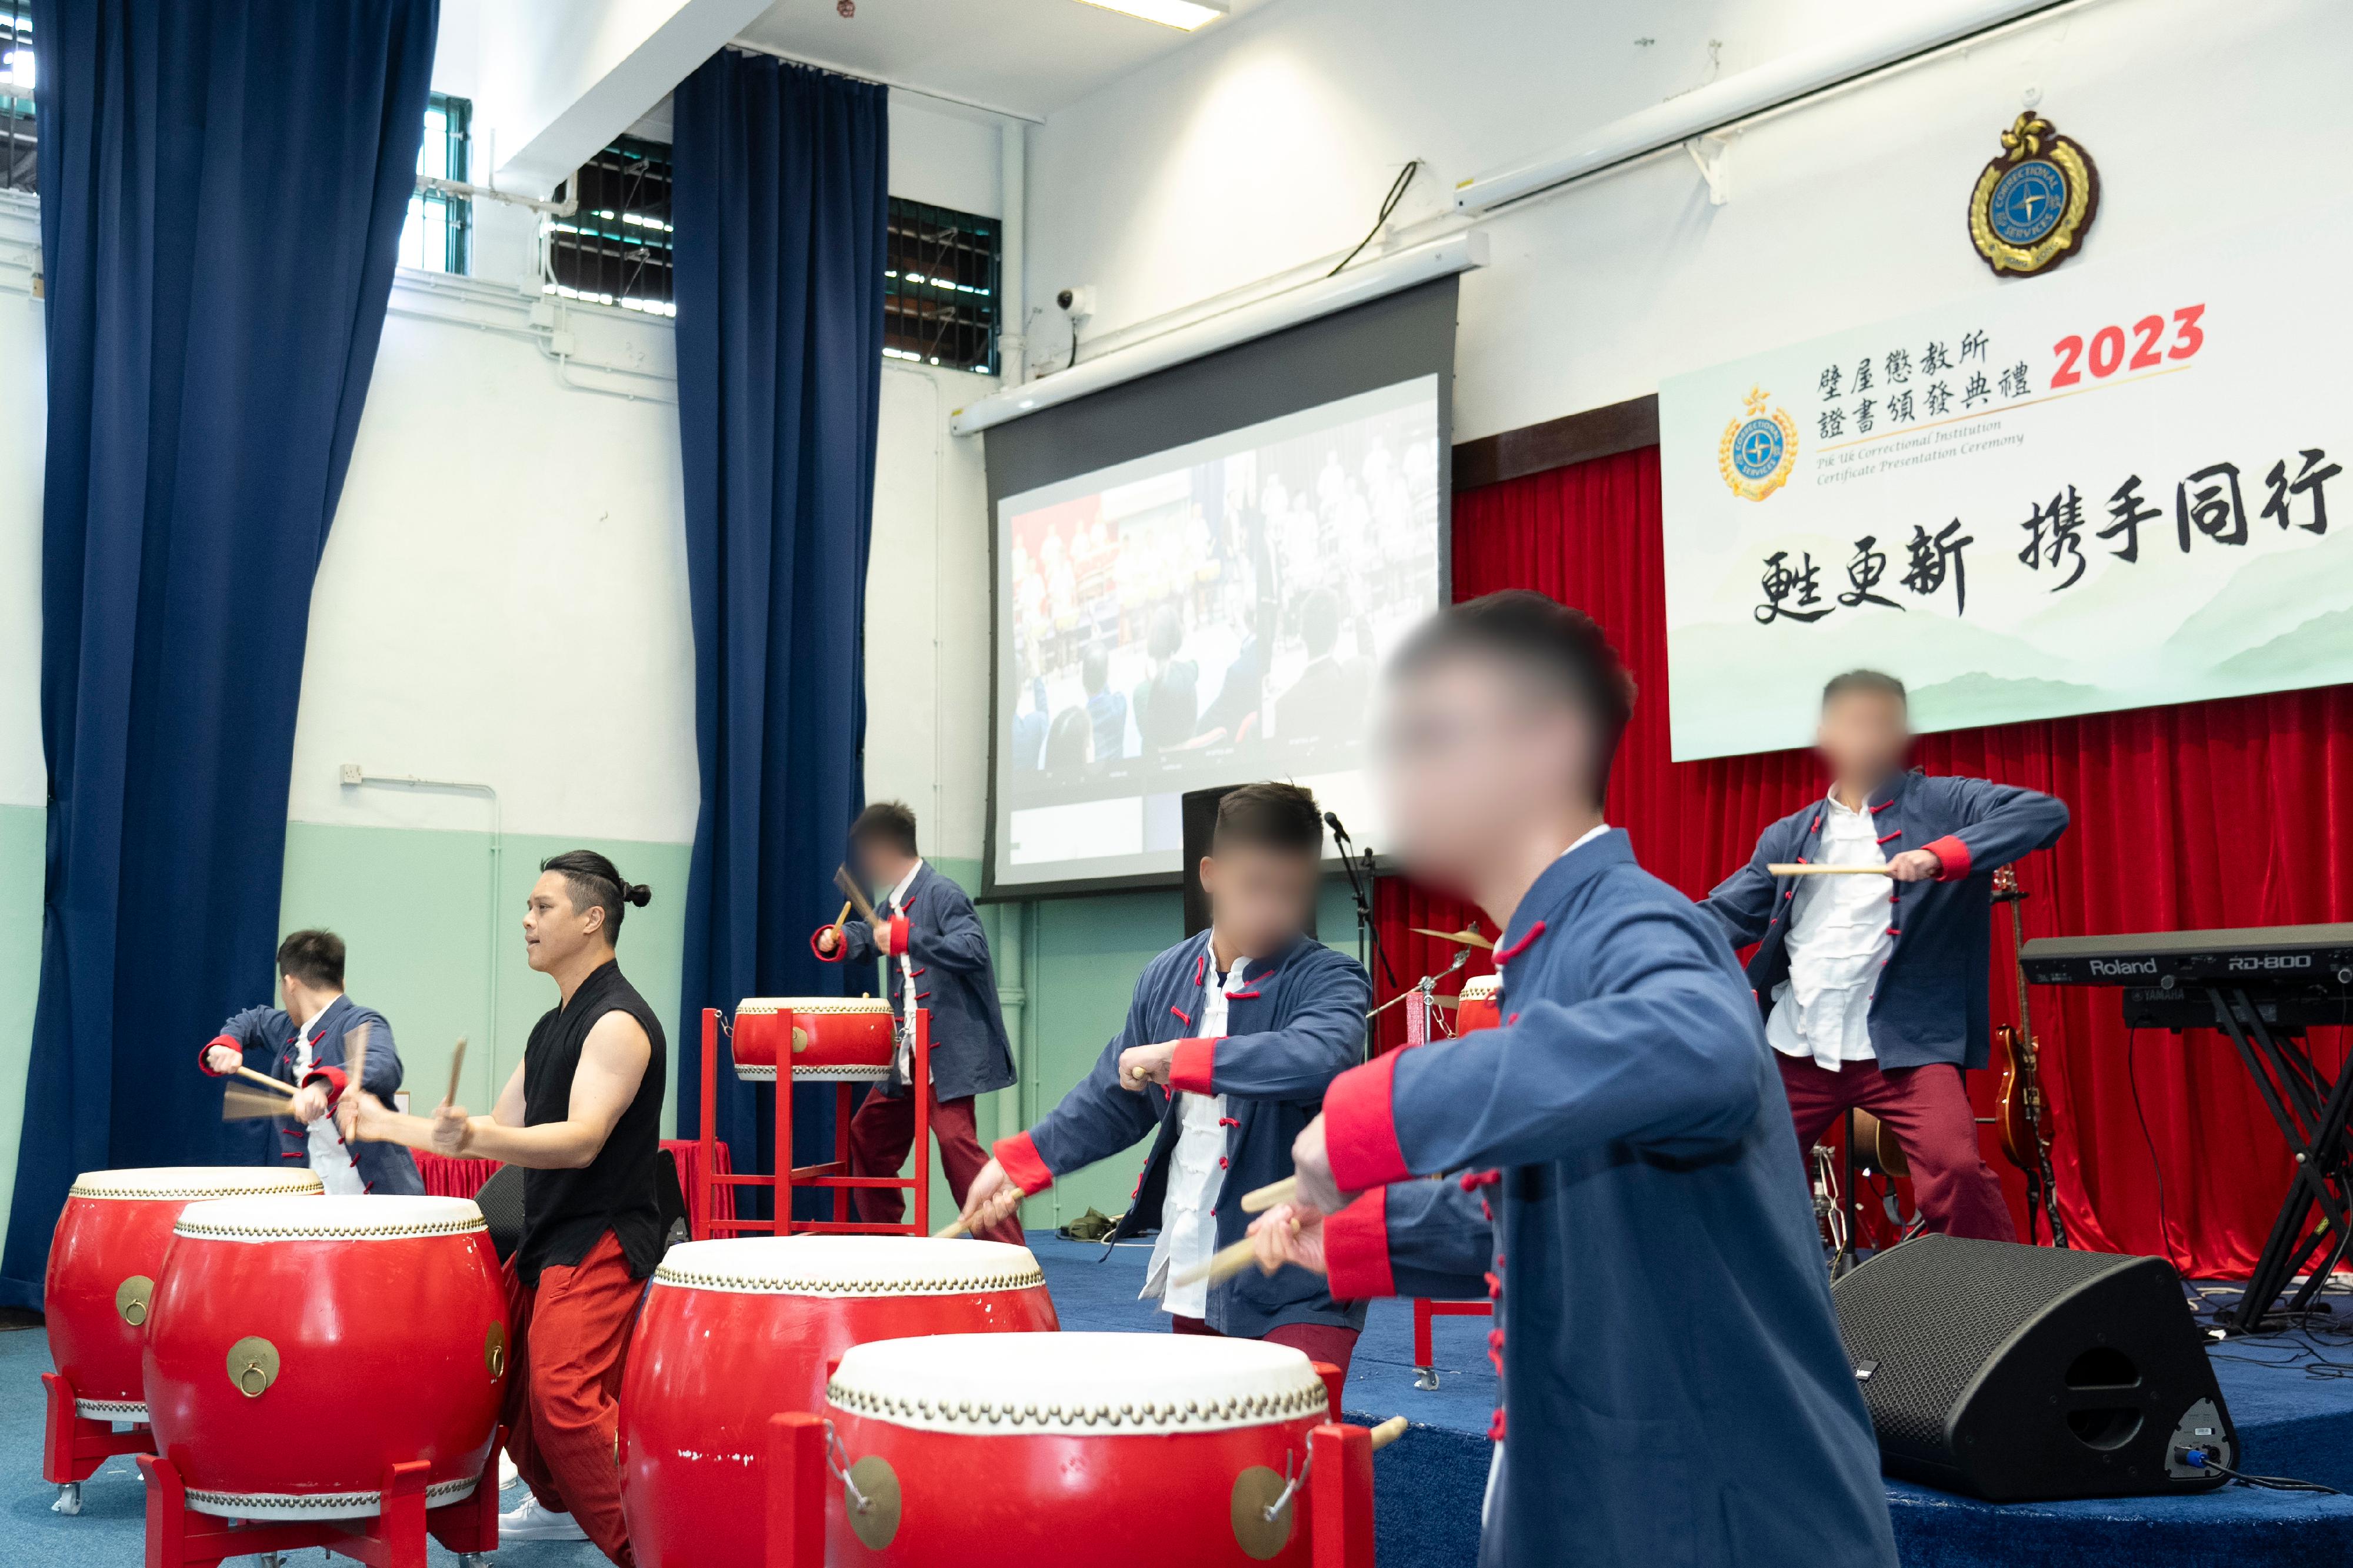 Young persons in custody (PICs) at Pik Uk Correctional Institution of the Correctional Services Department were presented with certificates at a ceremony today (December 7) in recognition of their efforts and achievements in studies and vocational examinations. Photo shows young PICs presenting a Chinese drum performance at the ceremony.